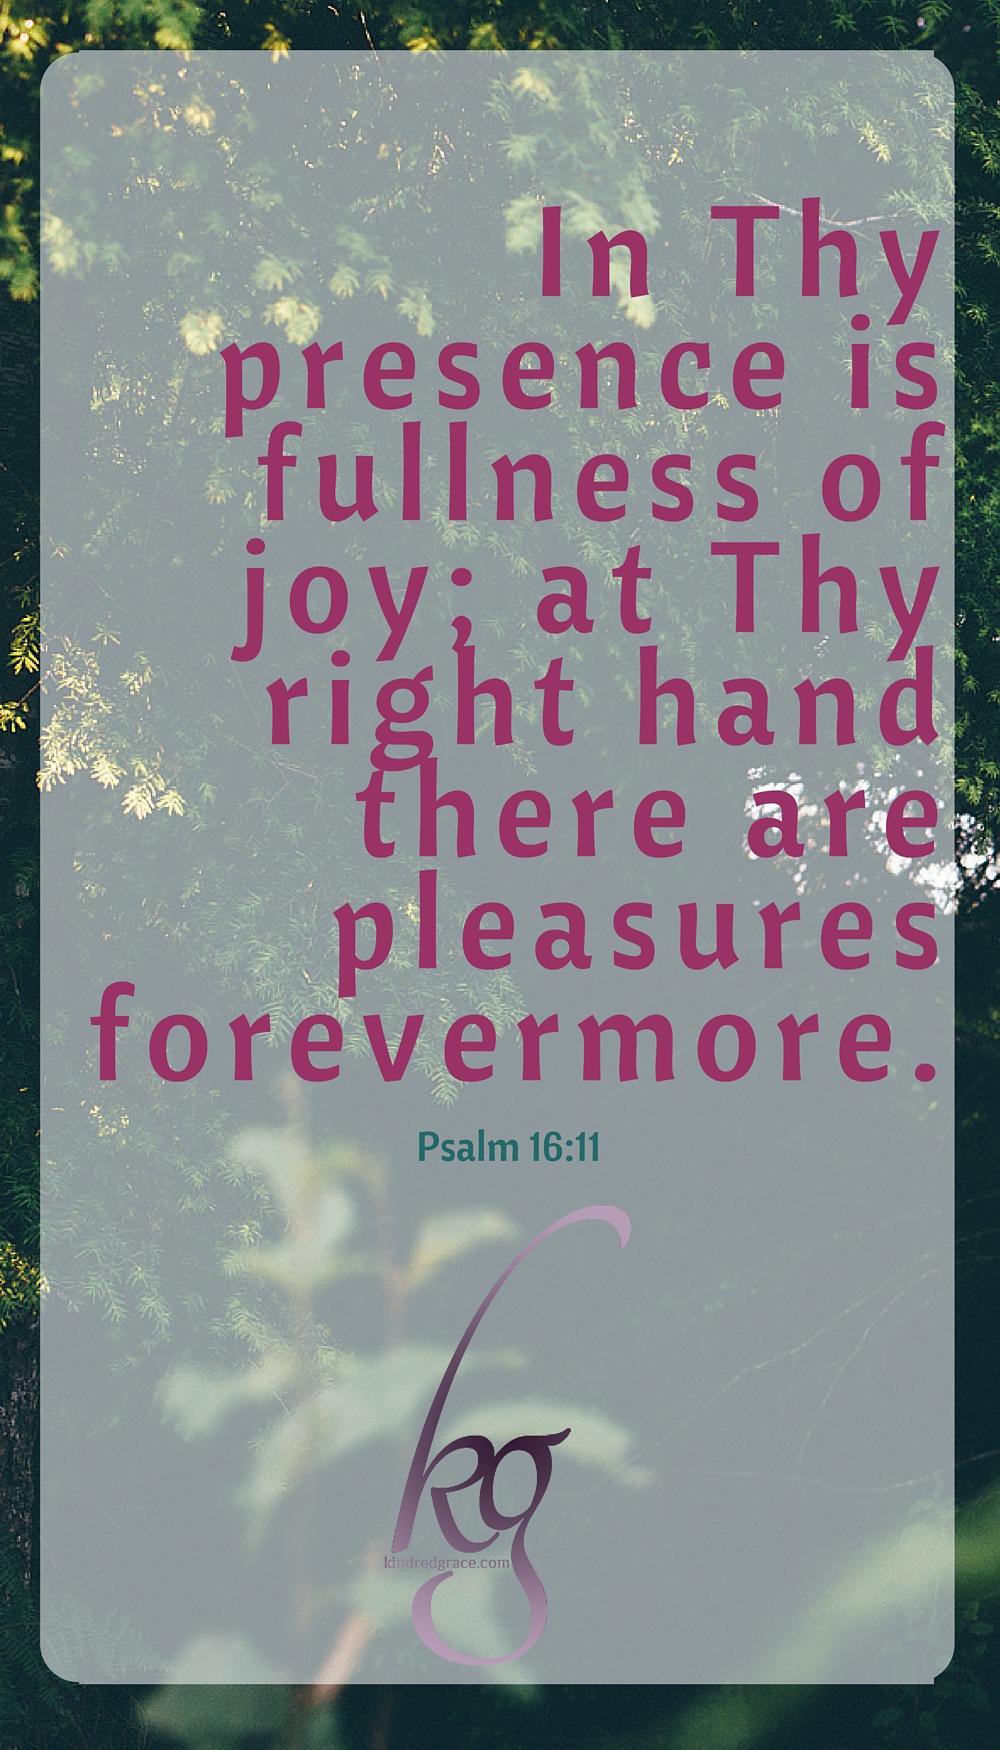 The psalmist said, "In Thy presence is fullness of joy; at Thy right hand there are pleasures forevermore." Jesus, for the joy that was set before Him, endured the cross. Let us not label ourselves followers of Jesus Christ until we have gladly and unreservedly taken up that cross and said from our hearts, "I will follow You, Lord. Work out Your whole will in my life at any cost, now and forever." via @KindredGrace